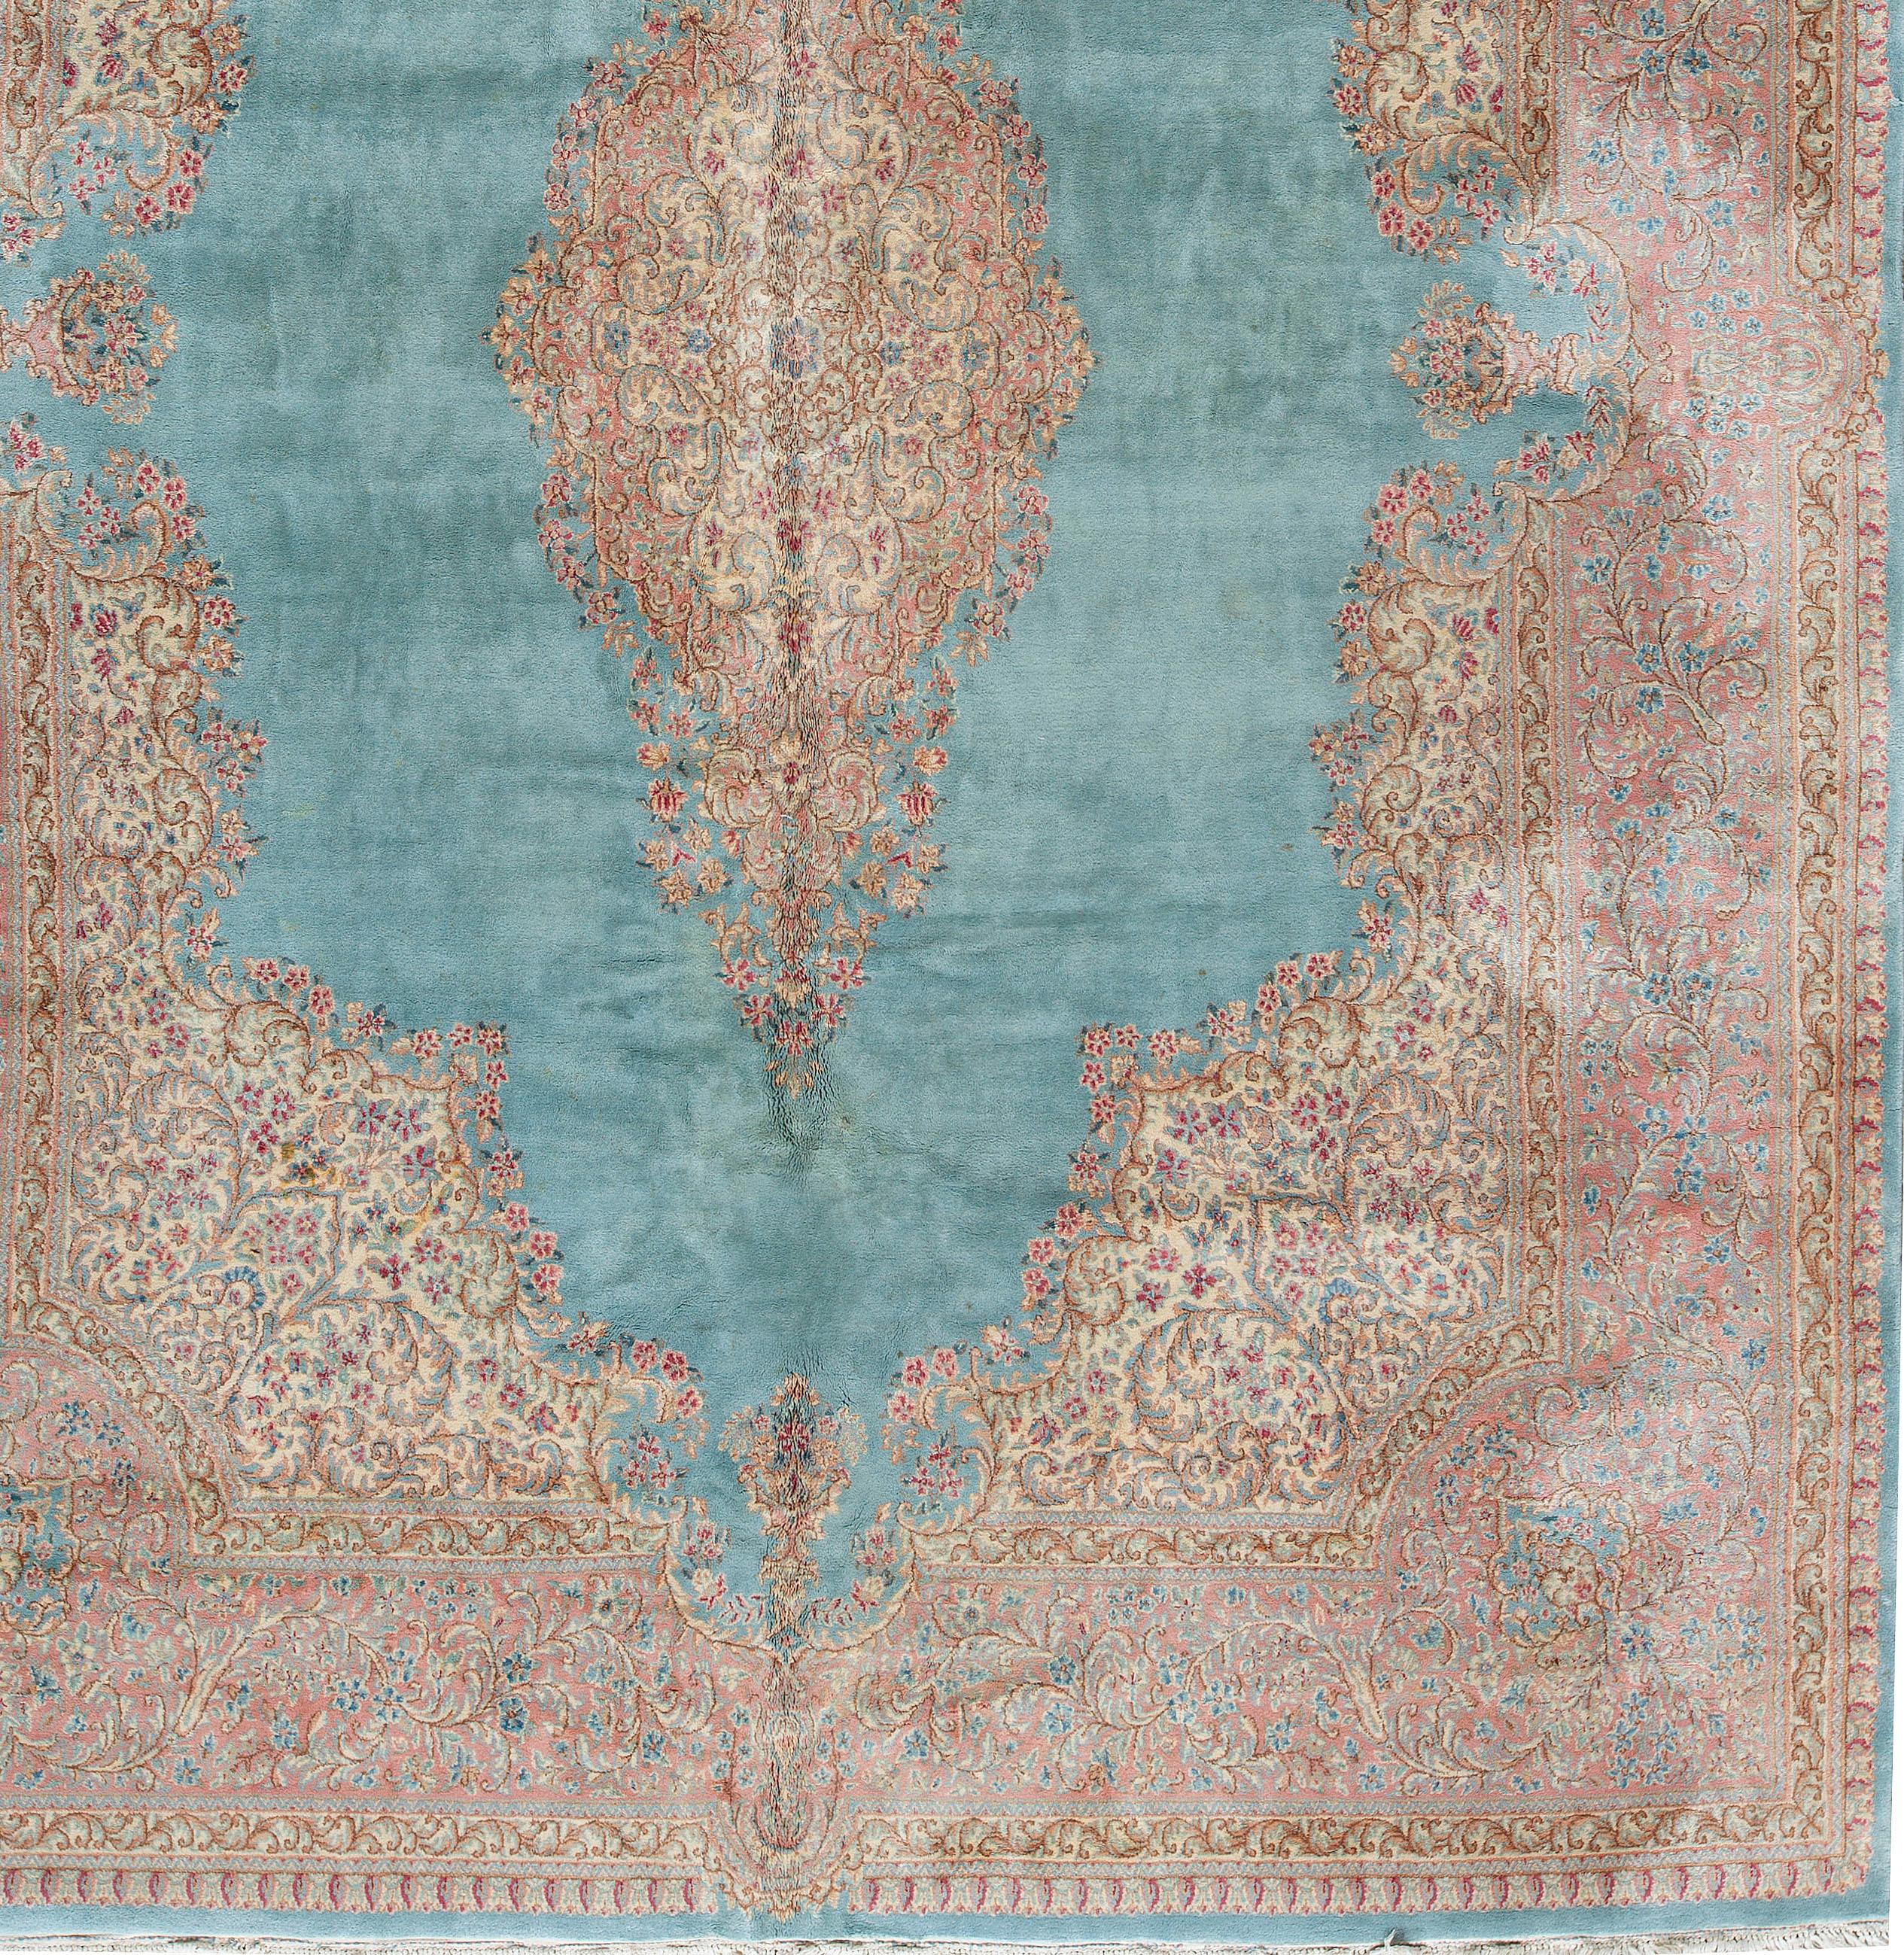 Vintage Persian Kerman rug, circa 1940. A Kerman rug with a soft blue ground having a light multicolored central design repeated in the borders this rug will create a sense of style and character to any area it is placed. Size:11'7 x 15'7.